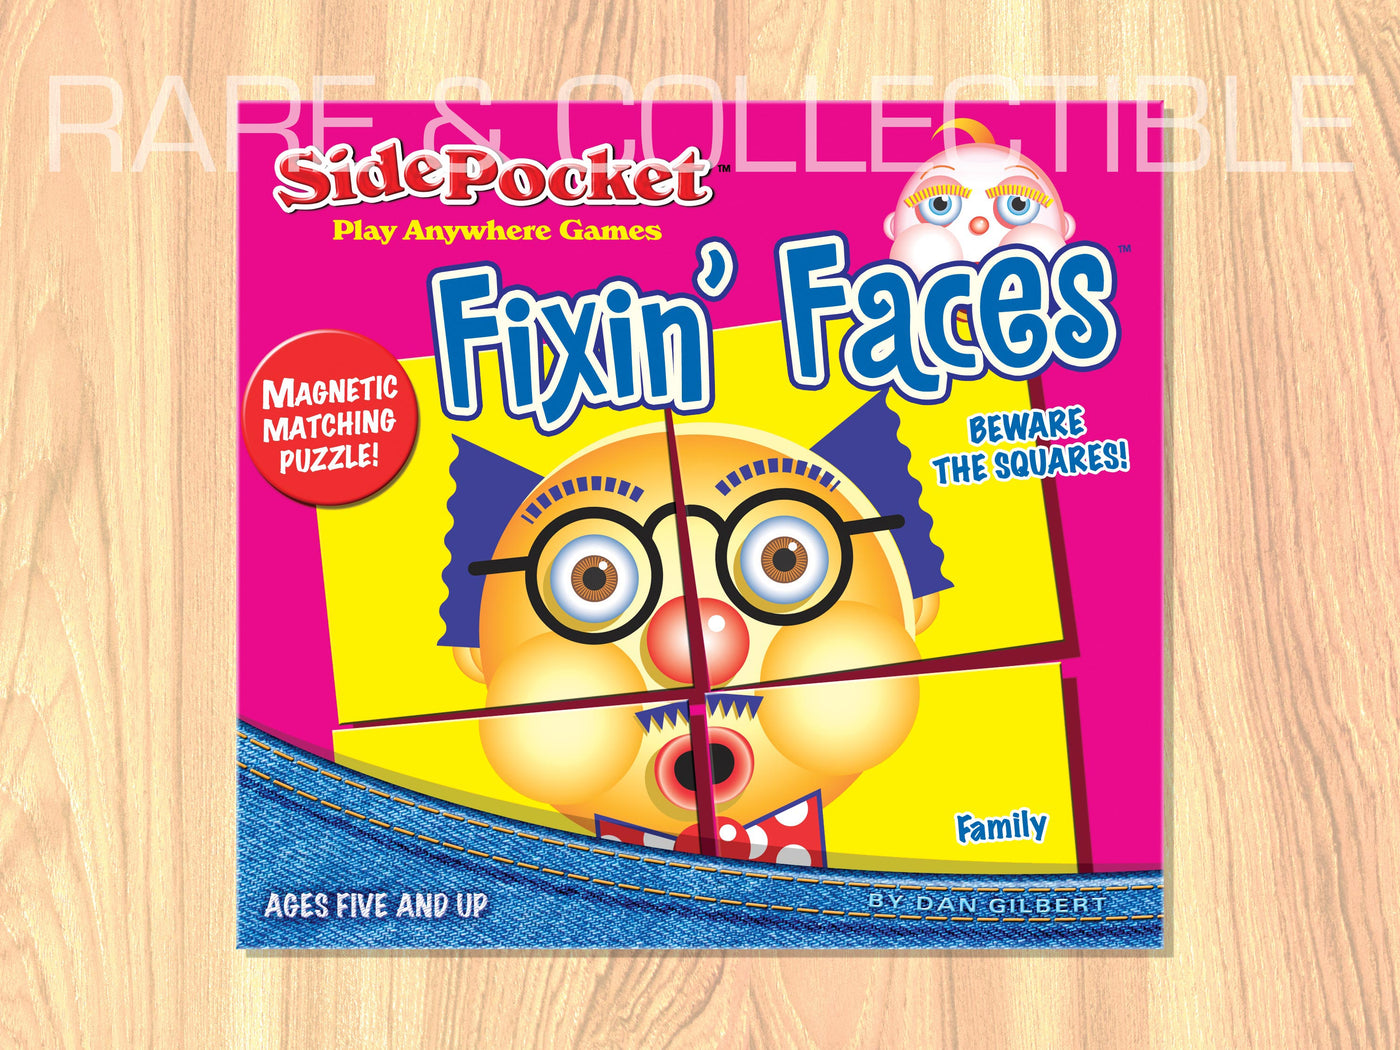 Rare & Collectable "Fixen' Faces" Family Magnetic SidePocket Brain Teaser Game by Dan Gilbert